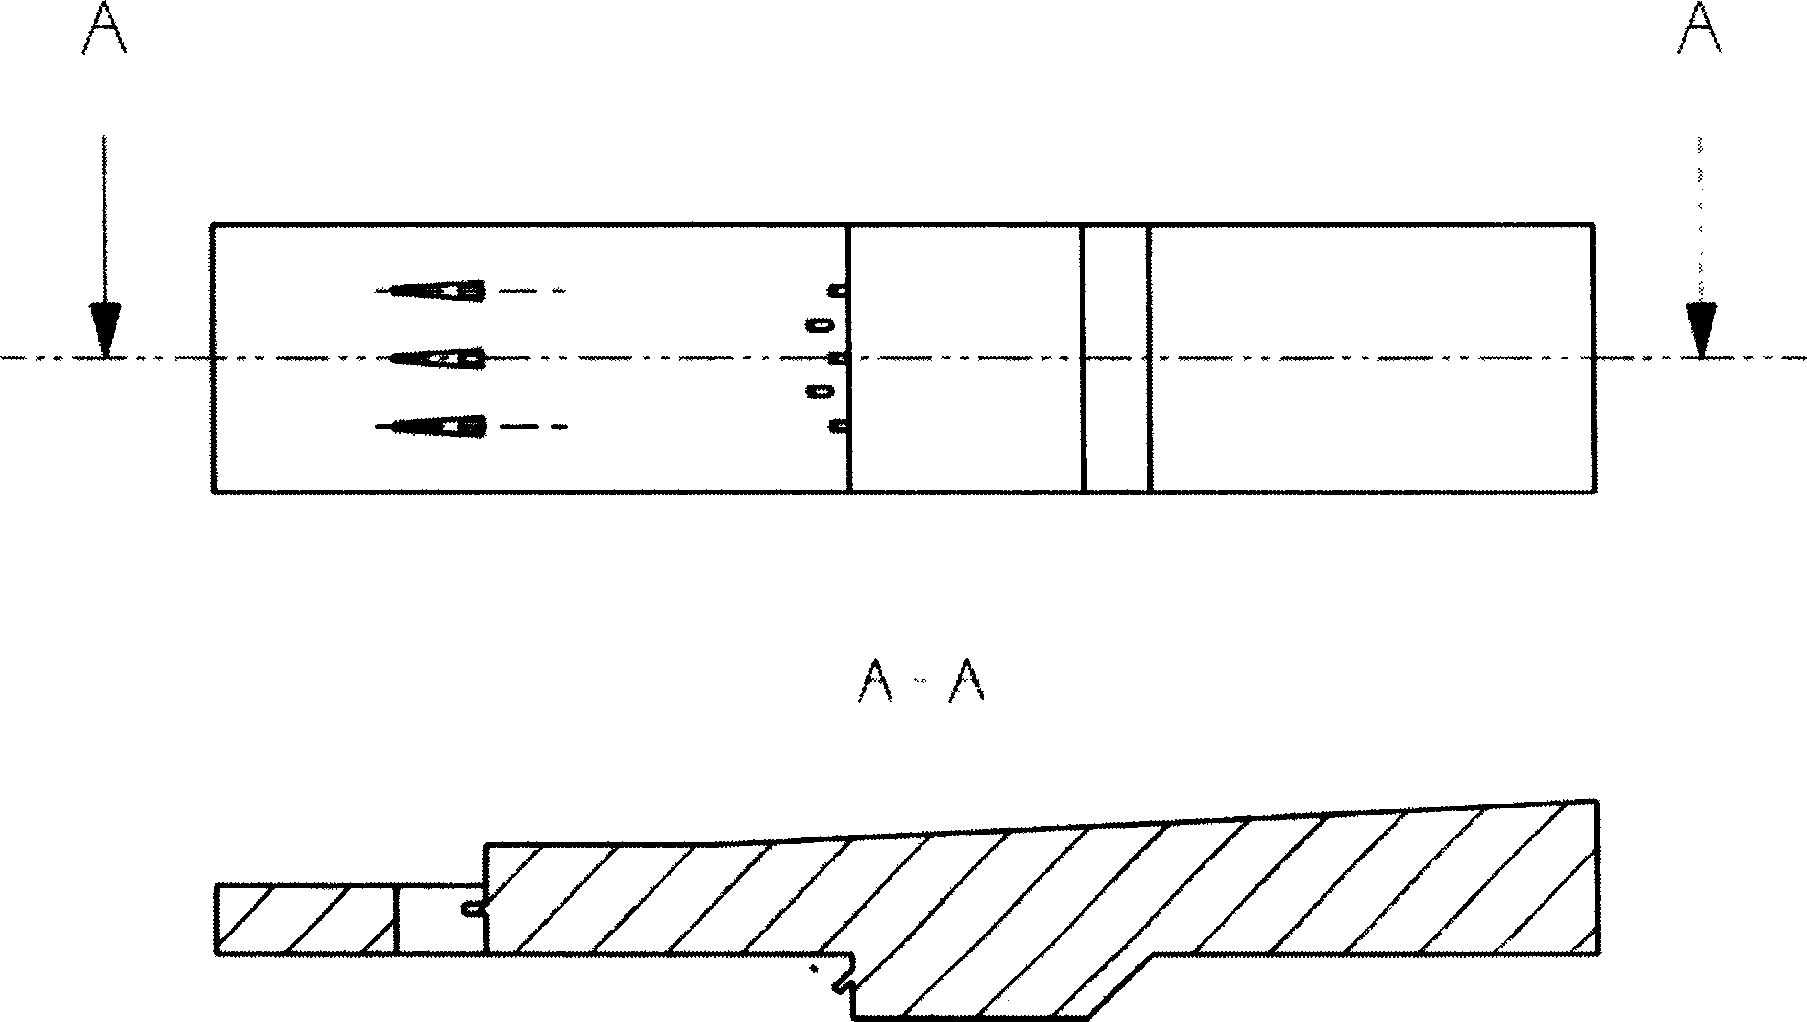 Supersonic speed combustion chamber burner scheme with novel injection structure